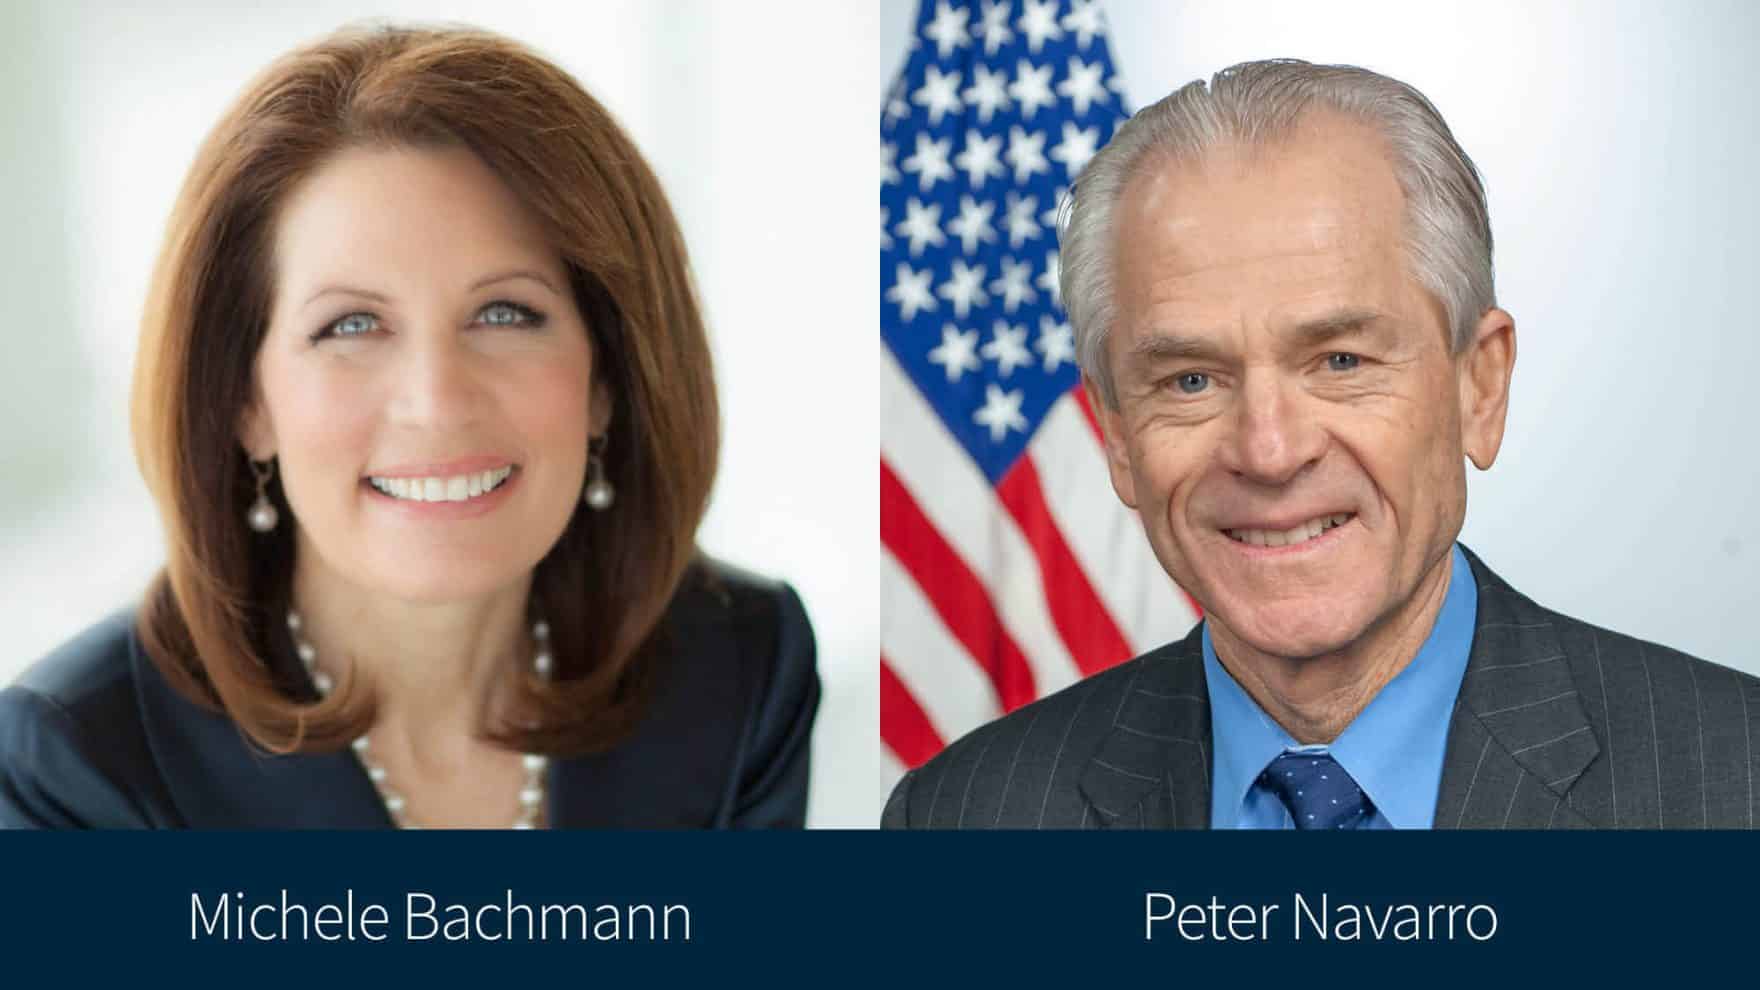 Michele Bachmann and Peter Navarro, the moderator and speaker of Regent University's election integrity online conference.